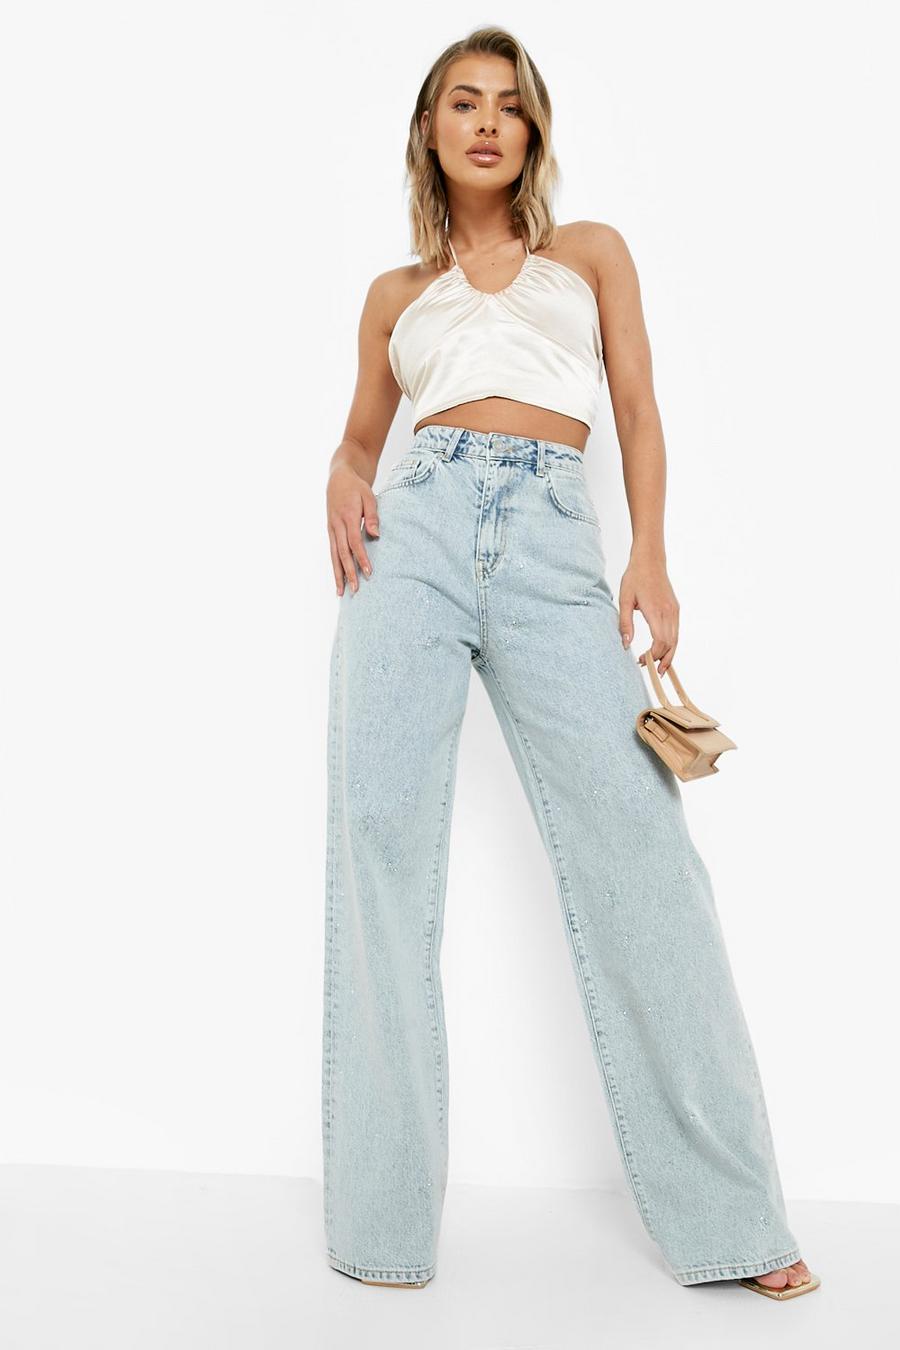 Blue B Women's Blowing Your Mind Slit-Front Wide Leg Rhinestone Jeans in Light Wash - Size M